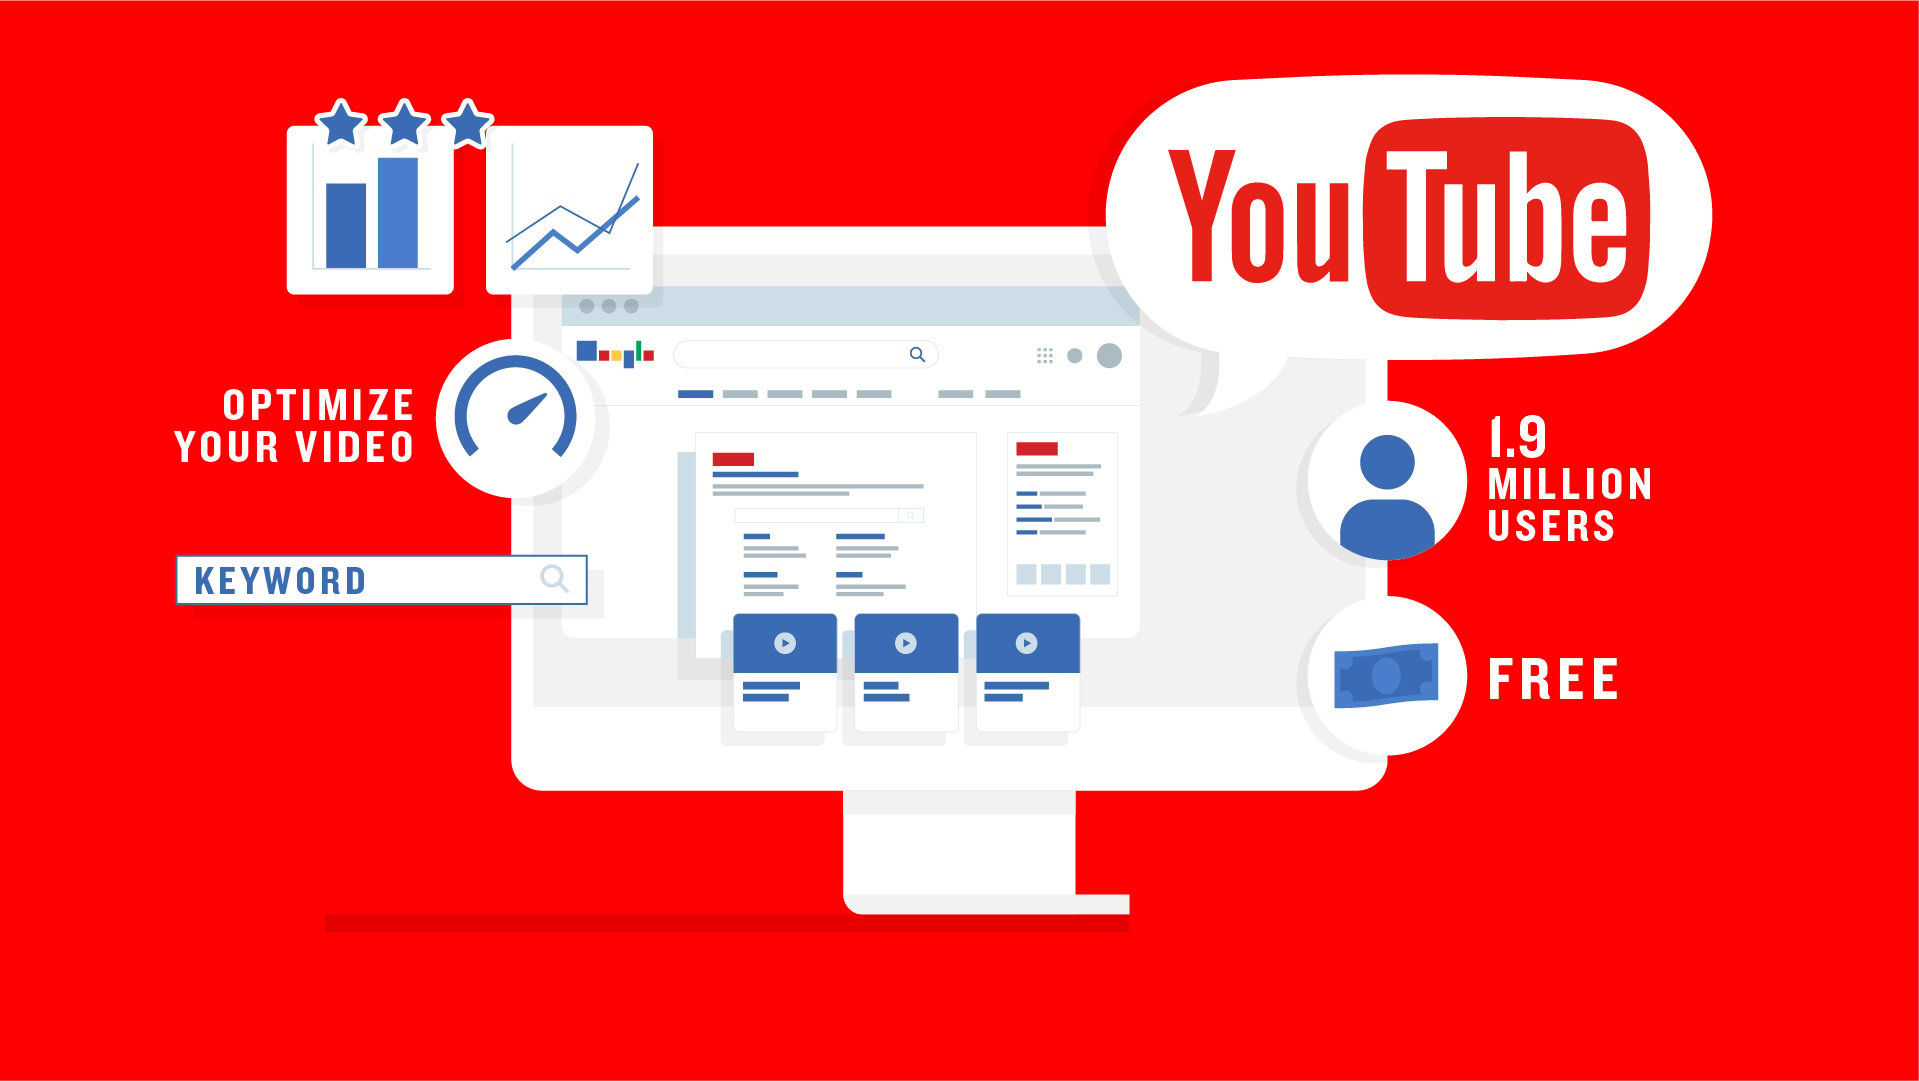 video_player_features_infographic_youtube